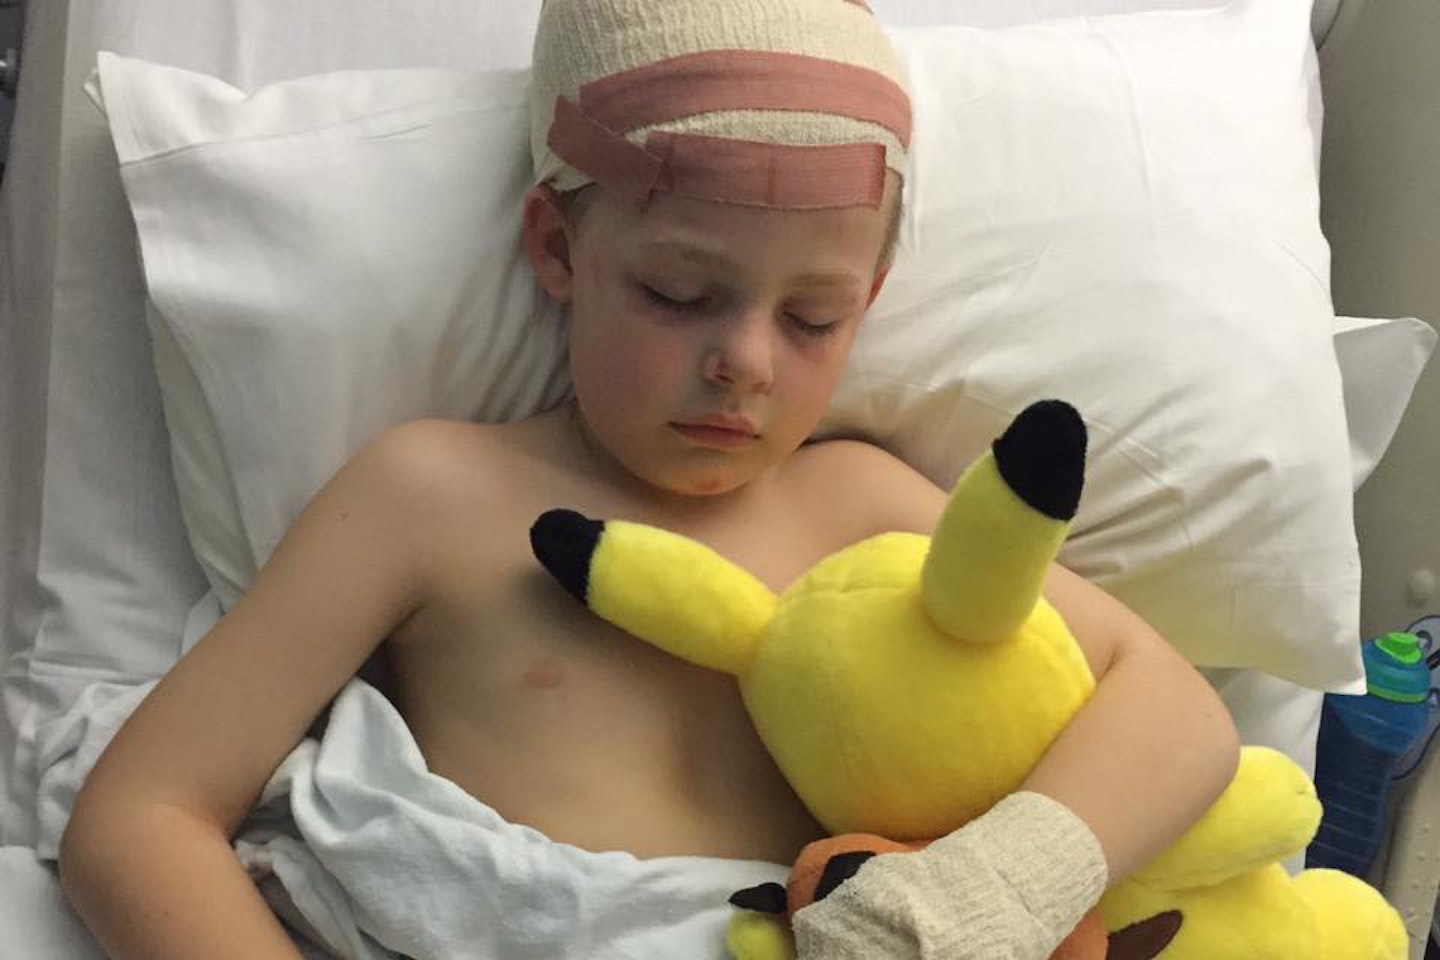 7-year-old Jak was hospitalised after brutally beaten by school bullies